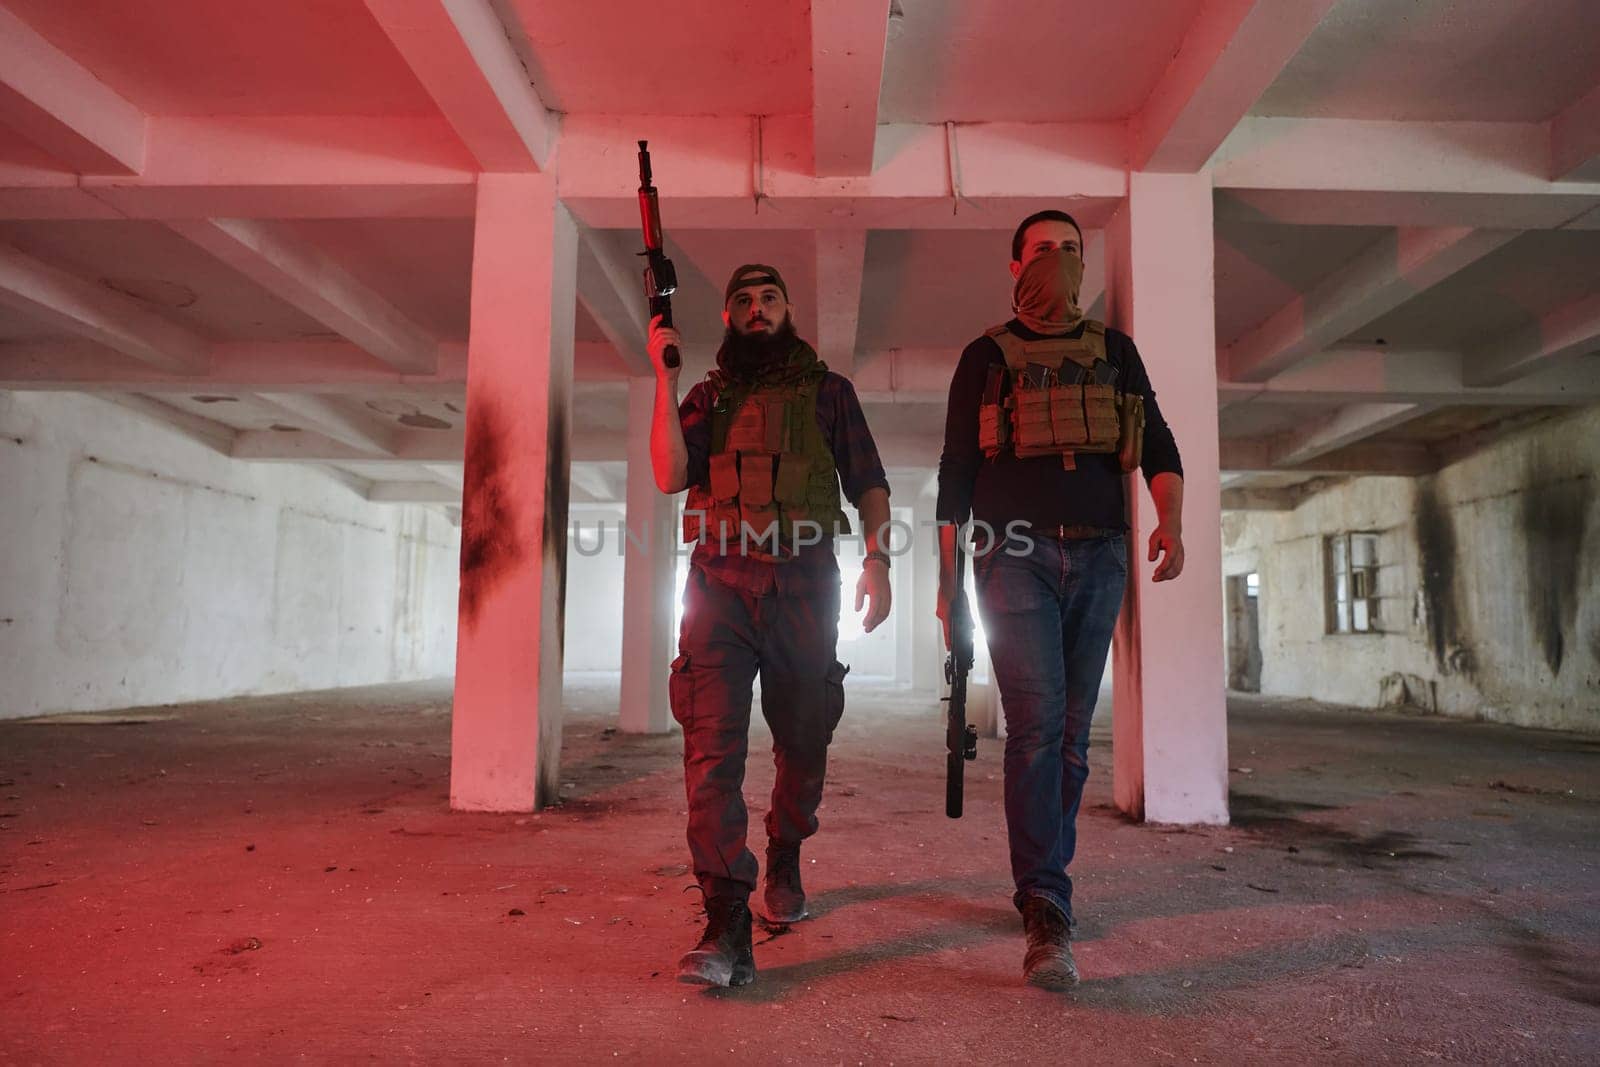 An abandoned building serves as the stronghold for a team of terrorists, fiercely guarding their occupied territory with guns and military equipment.